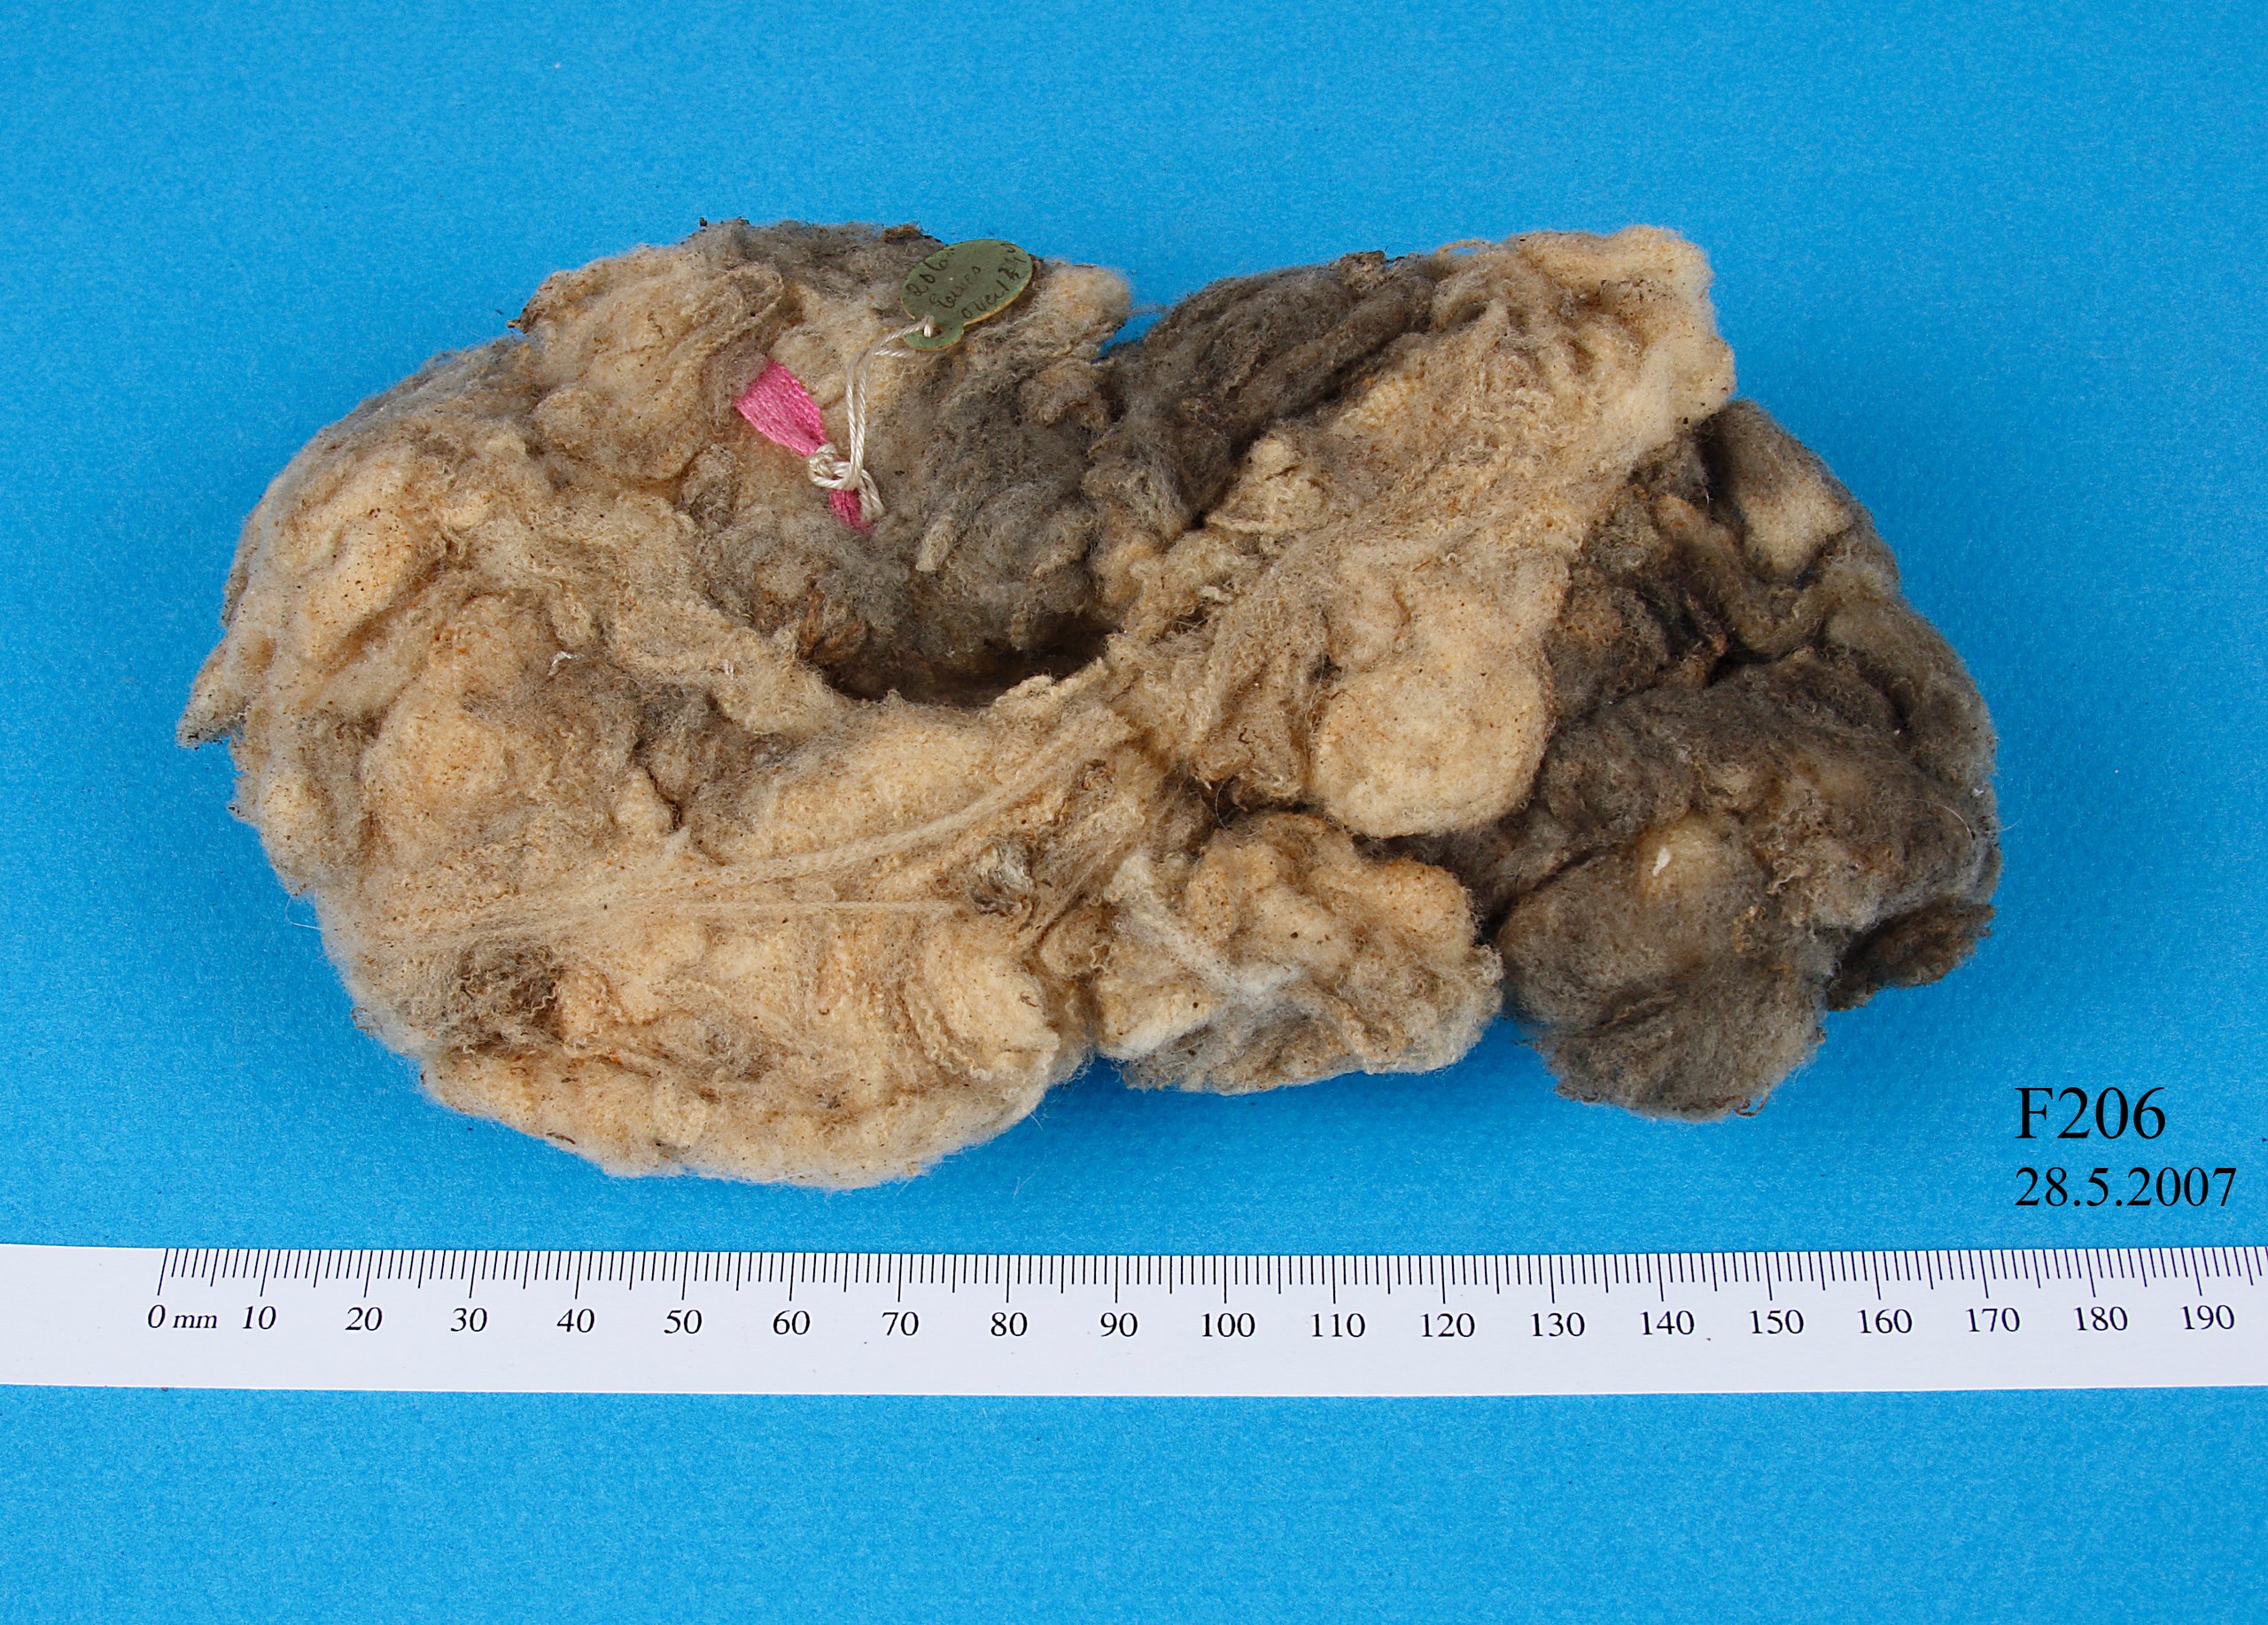 Wool specimen from a ewe over 1.5 years